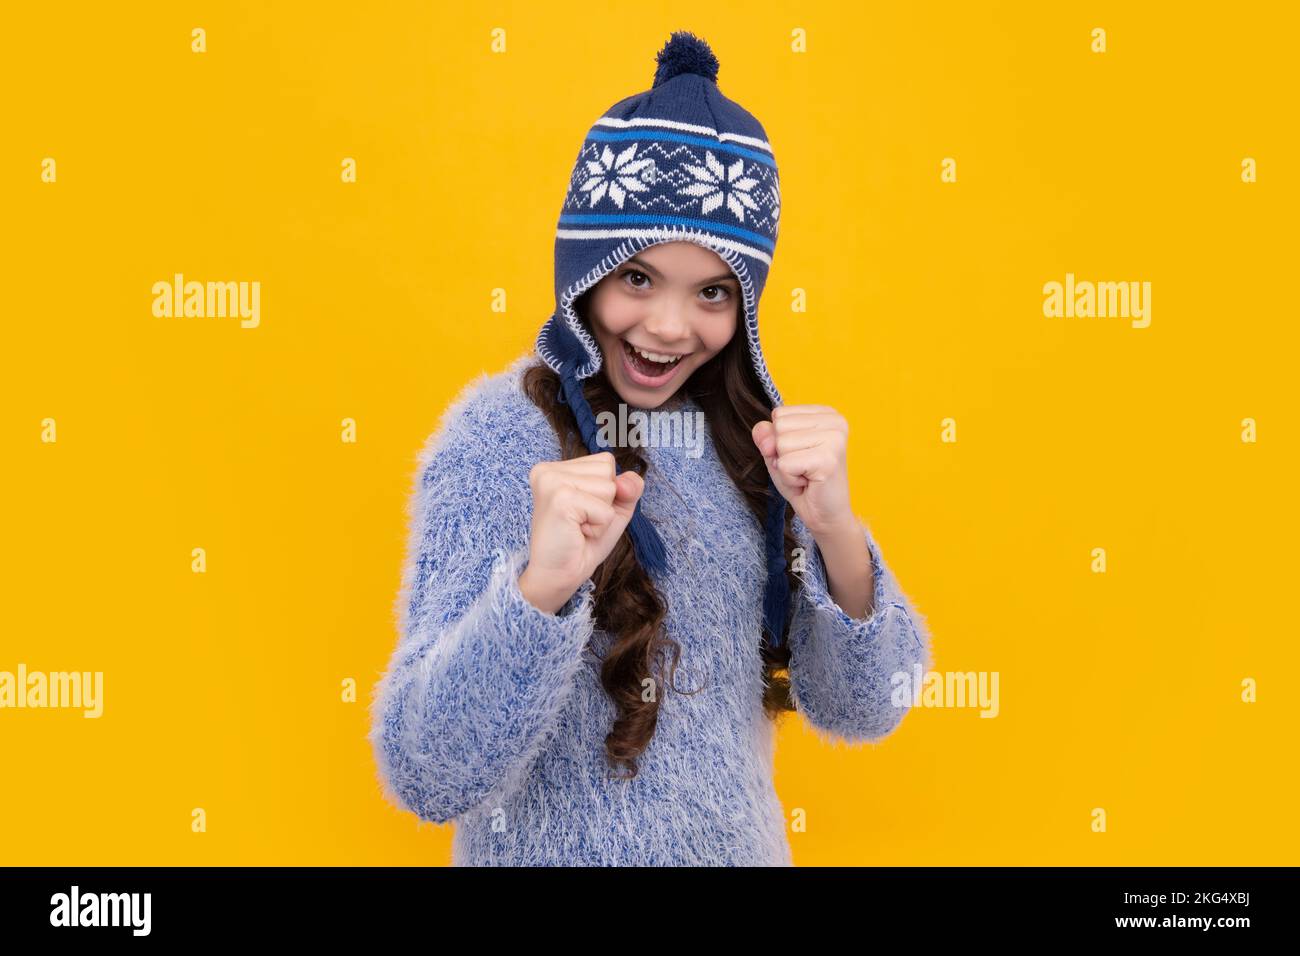 Beautiful winter kids portrait. Teenager girl posing with winter sweater and knit hat on yellow background. Excited teenager girl. Stock Photo